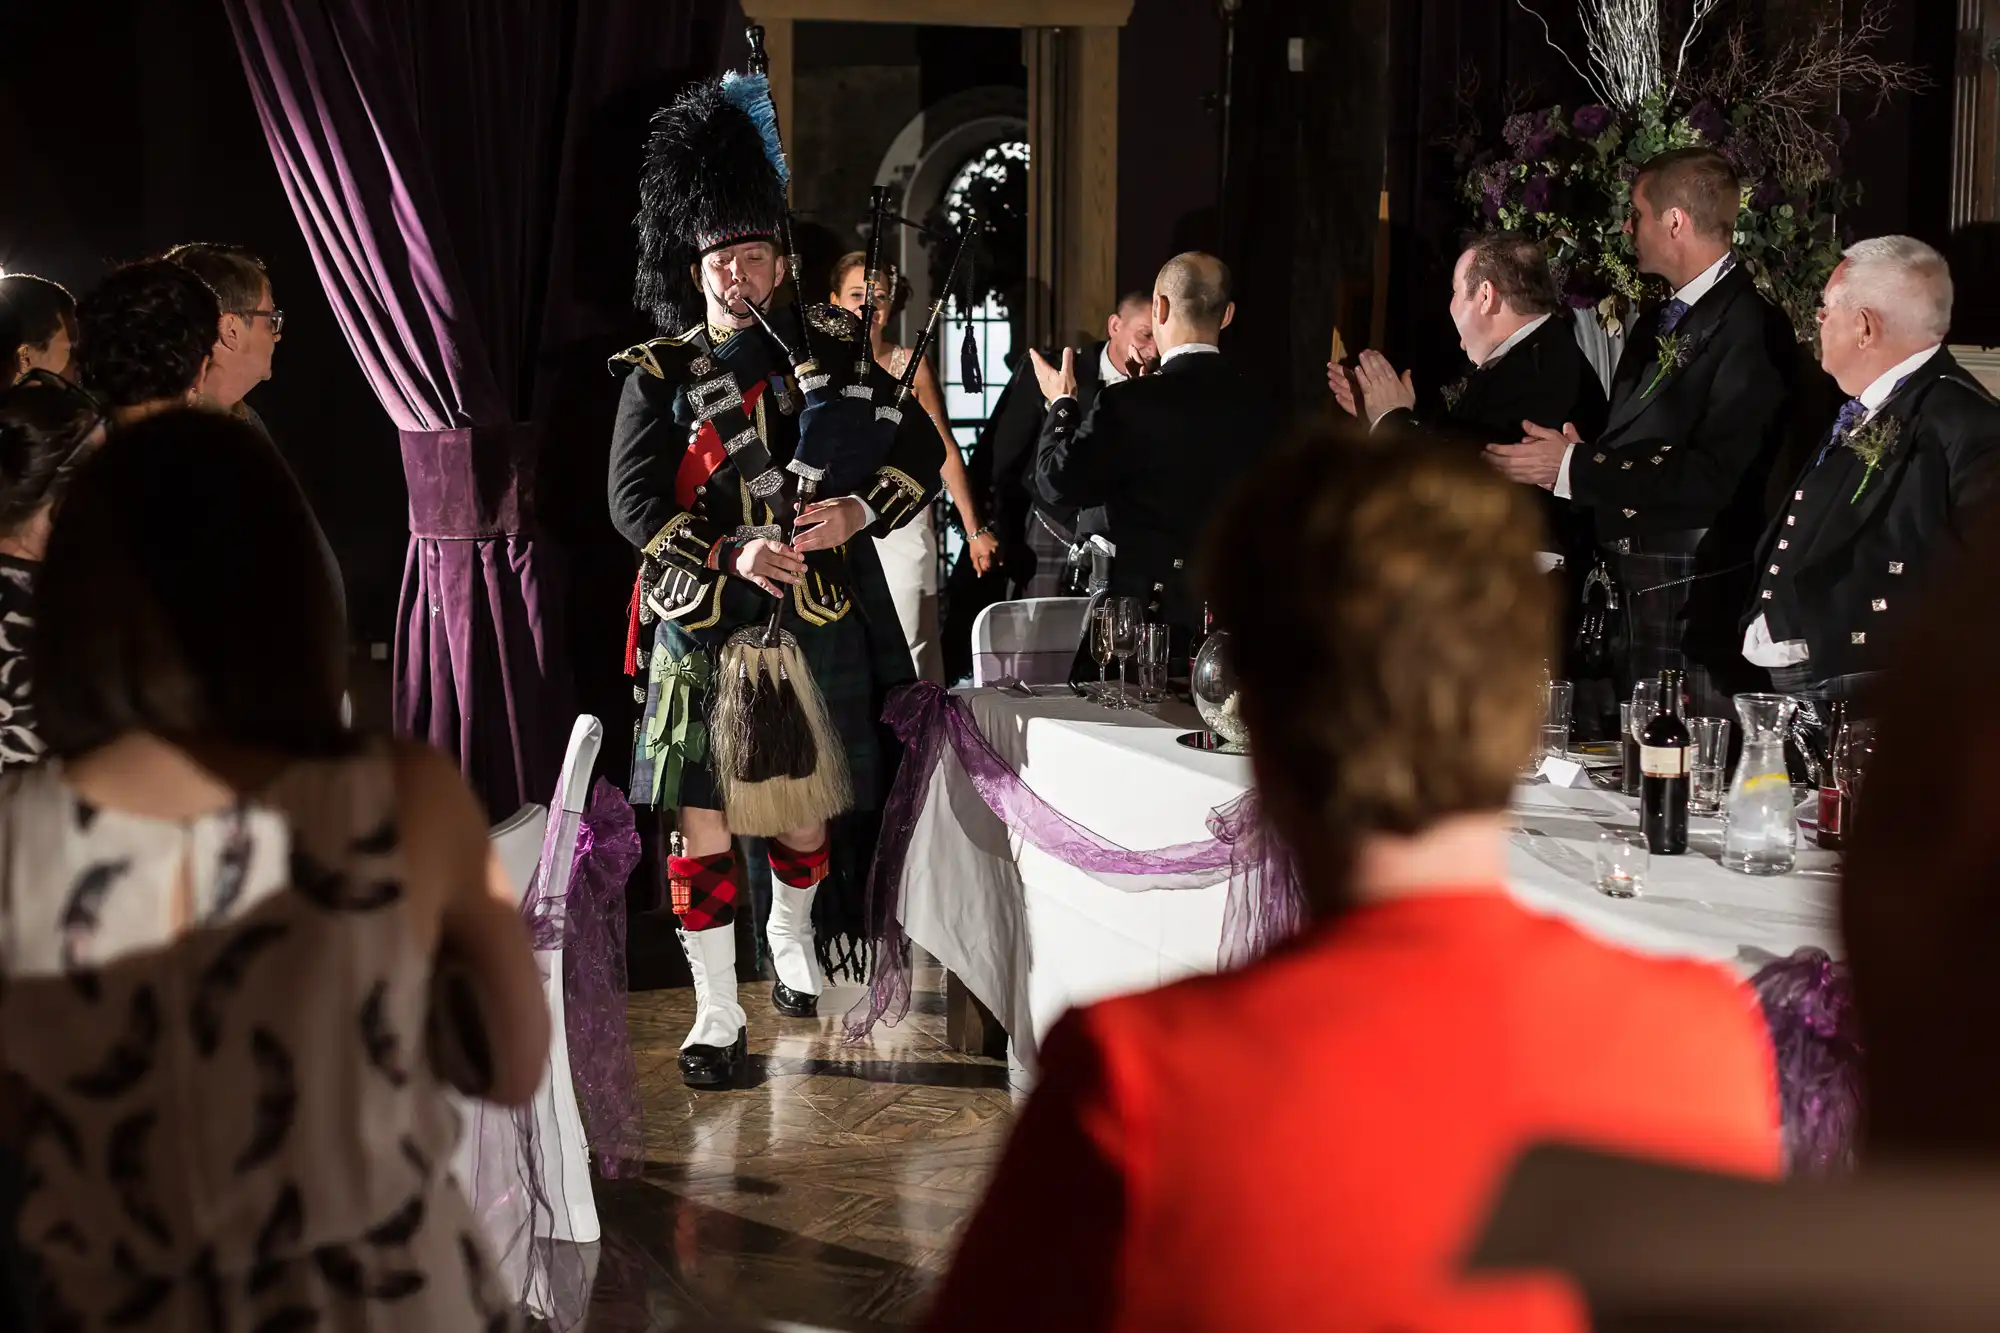 A bagpiper in traditional scottish attire performs at a wedding reception, surrounded by applauding guests.